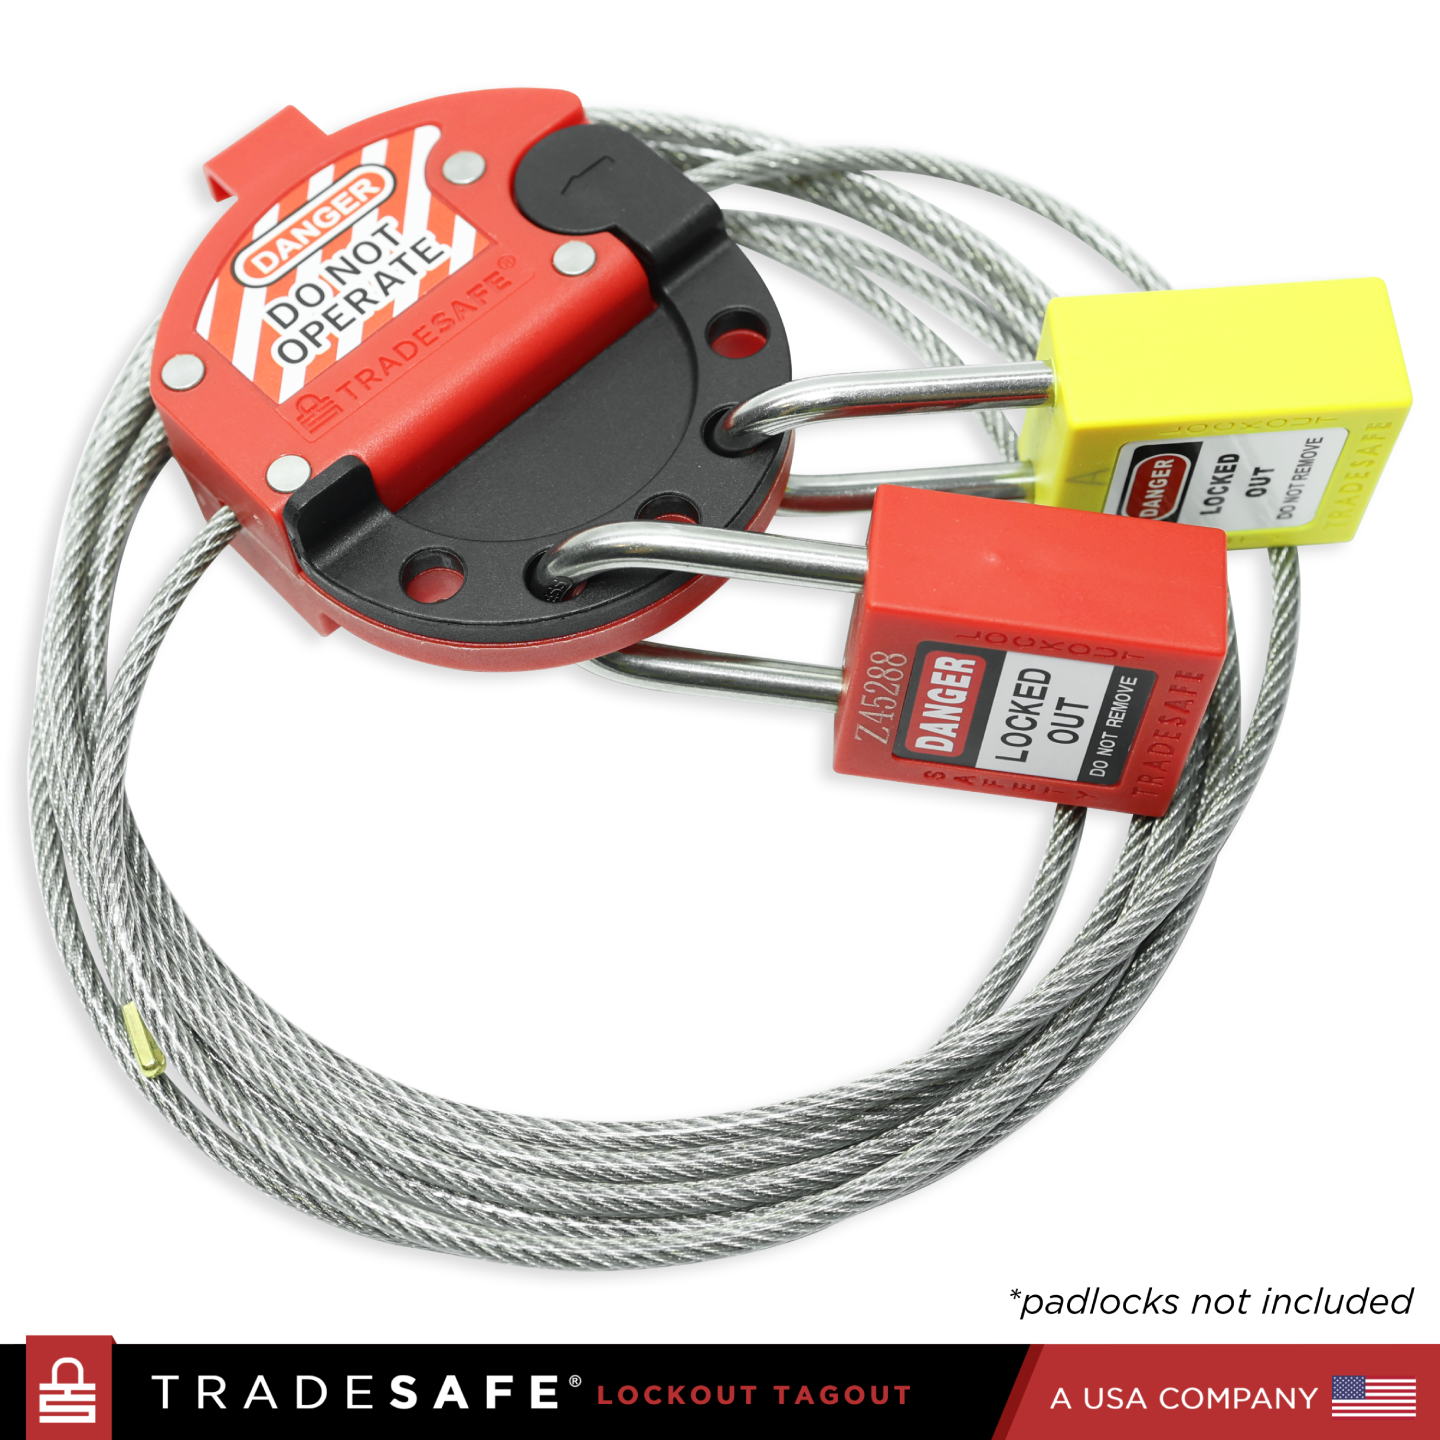 10ft adjustable cable lockout securely fastened with 2 LOTO locks